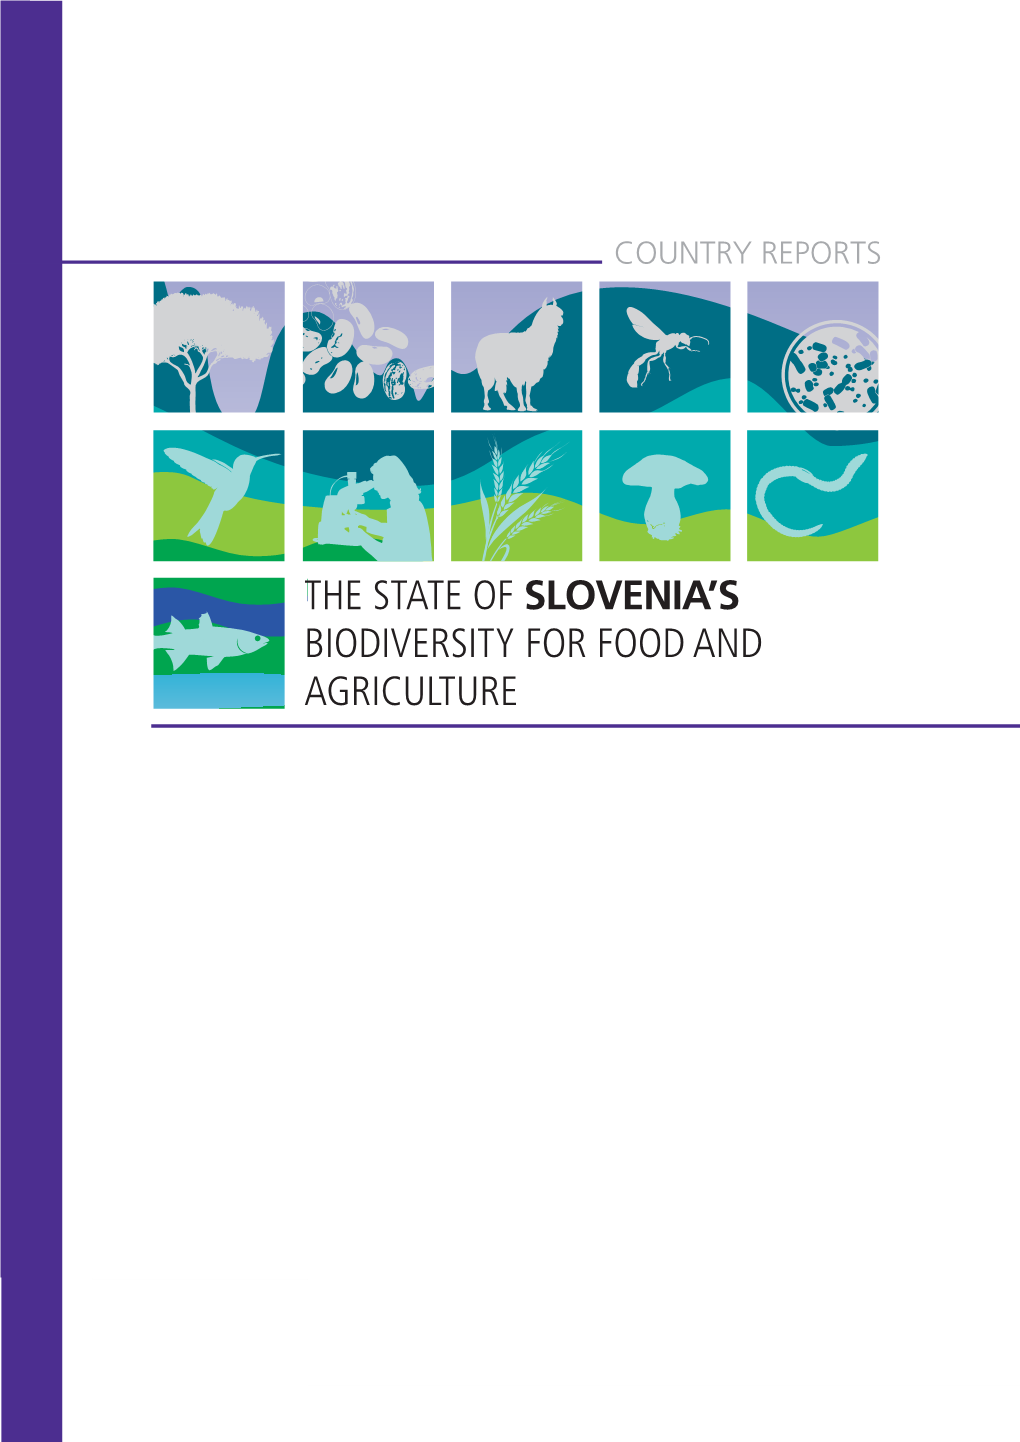 The State of Slovenia's Biodiversity for Food And